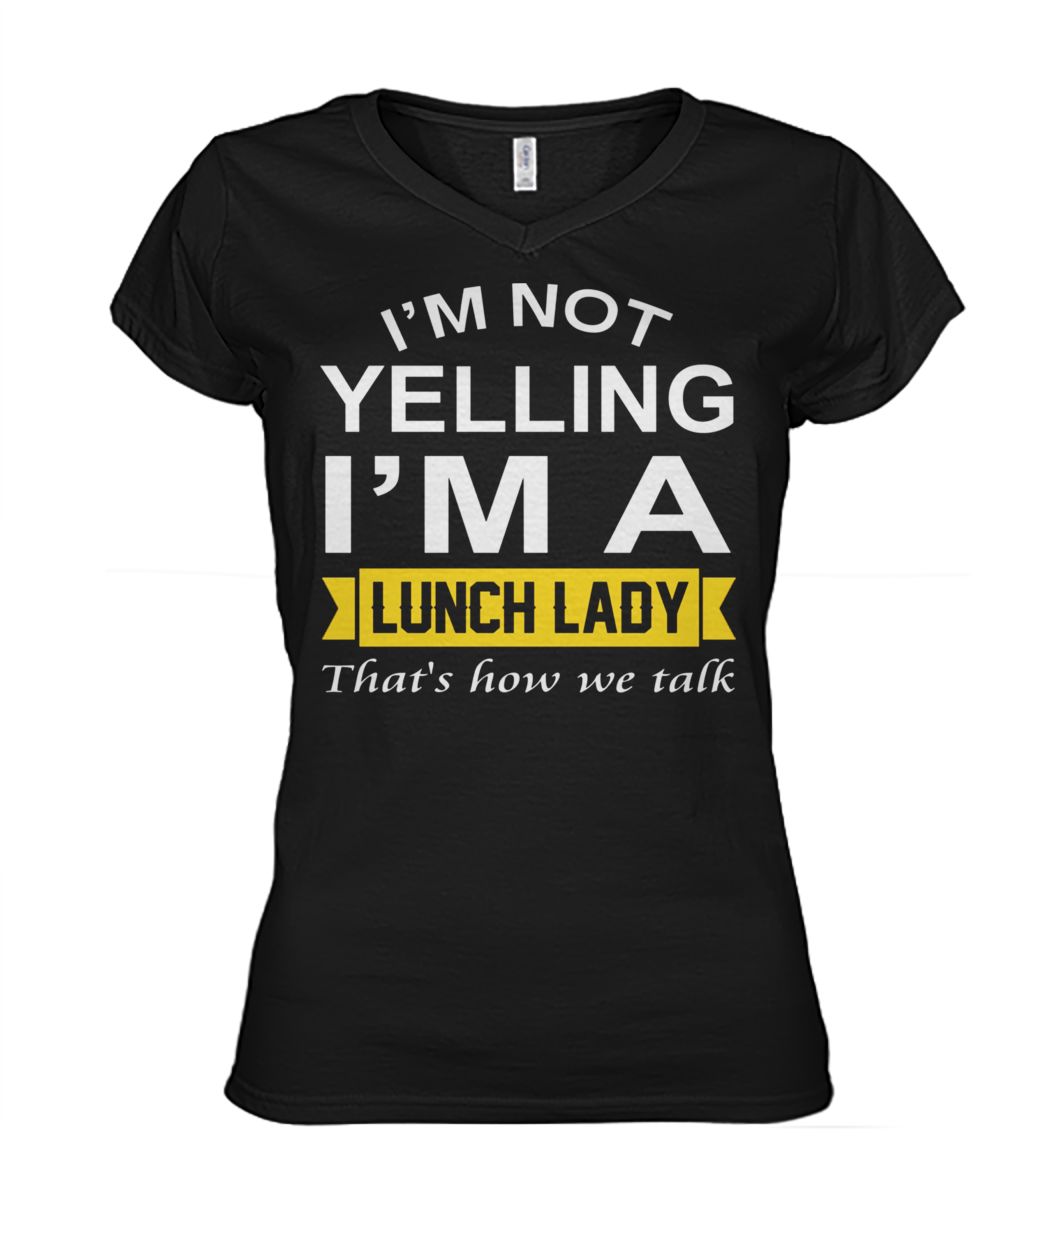 I'm not yelling I'm the lunch lady that's how we talk women's v-neck